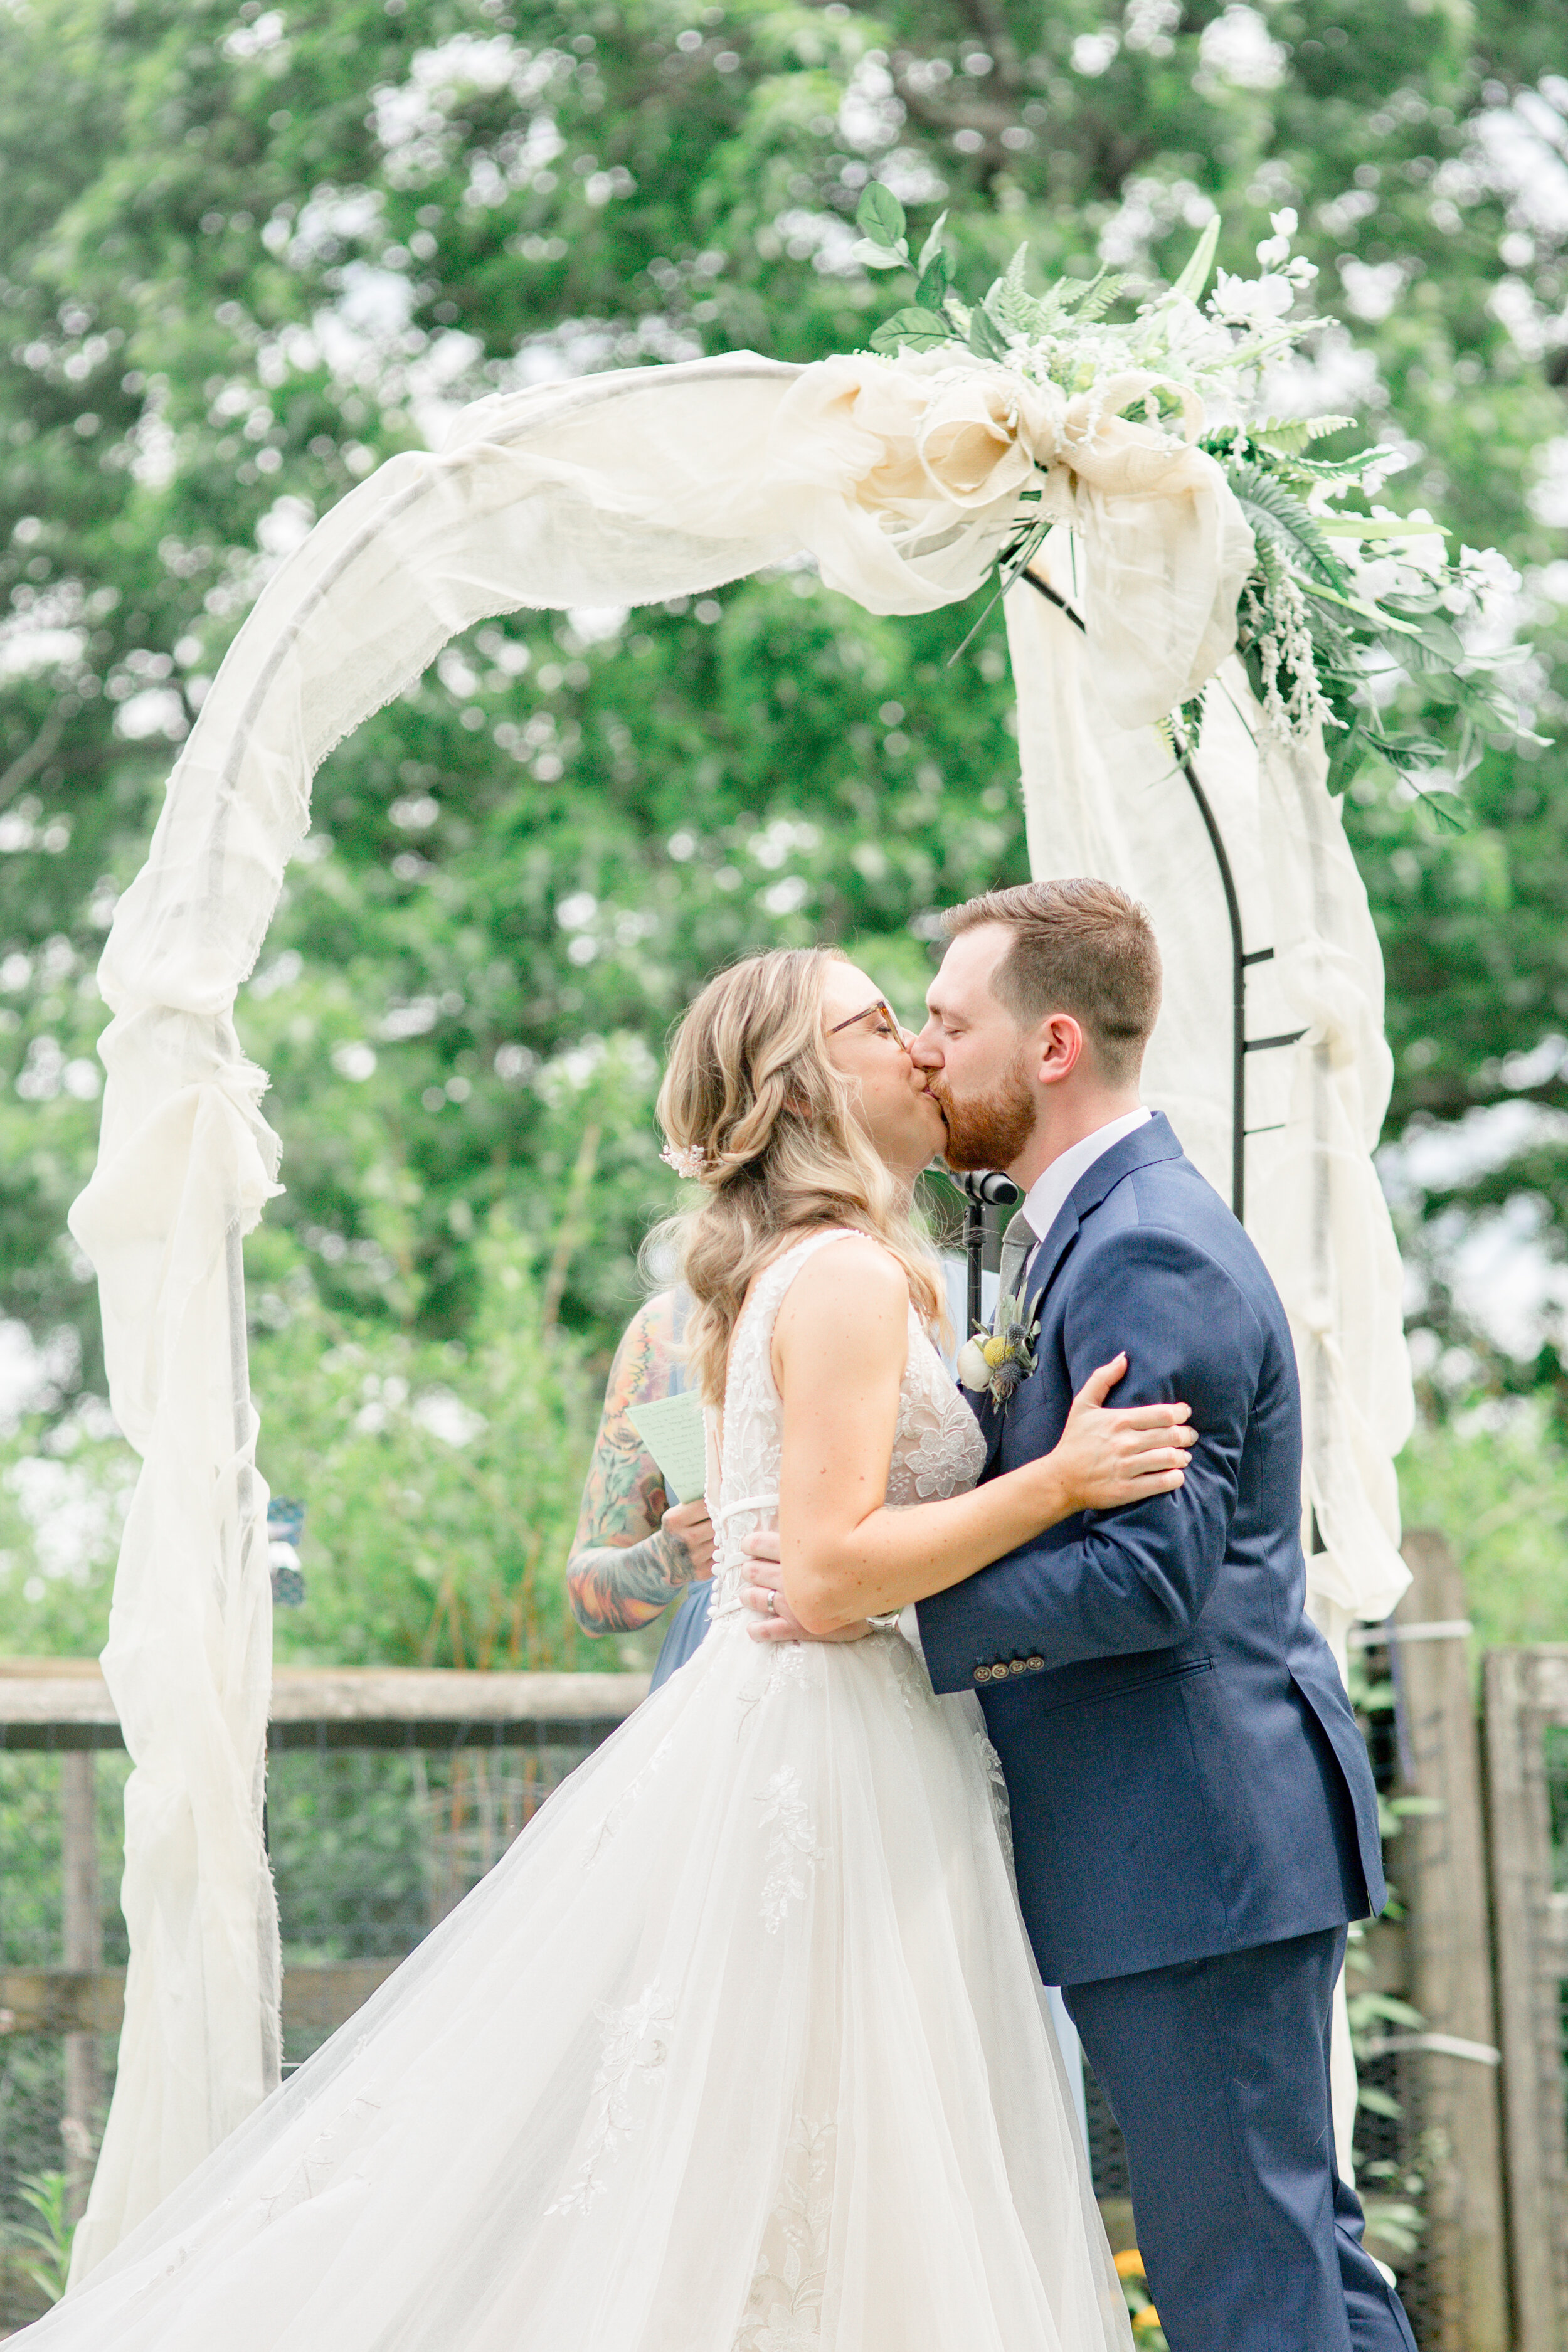 From Middle School To Marriage - A Charming Bucks County Backyard Wedding 